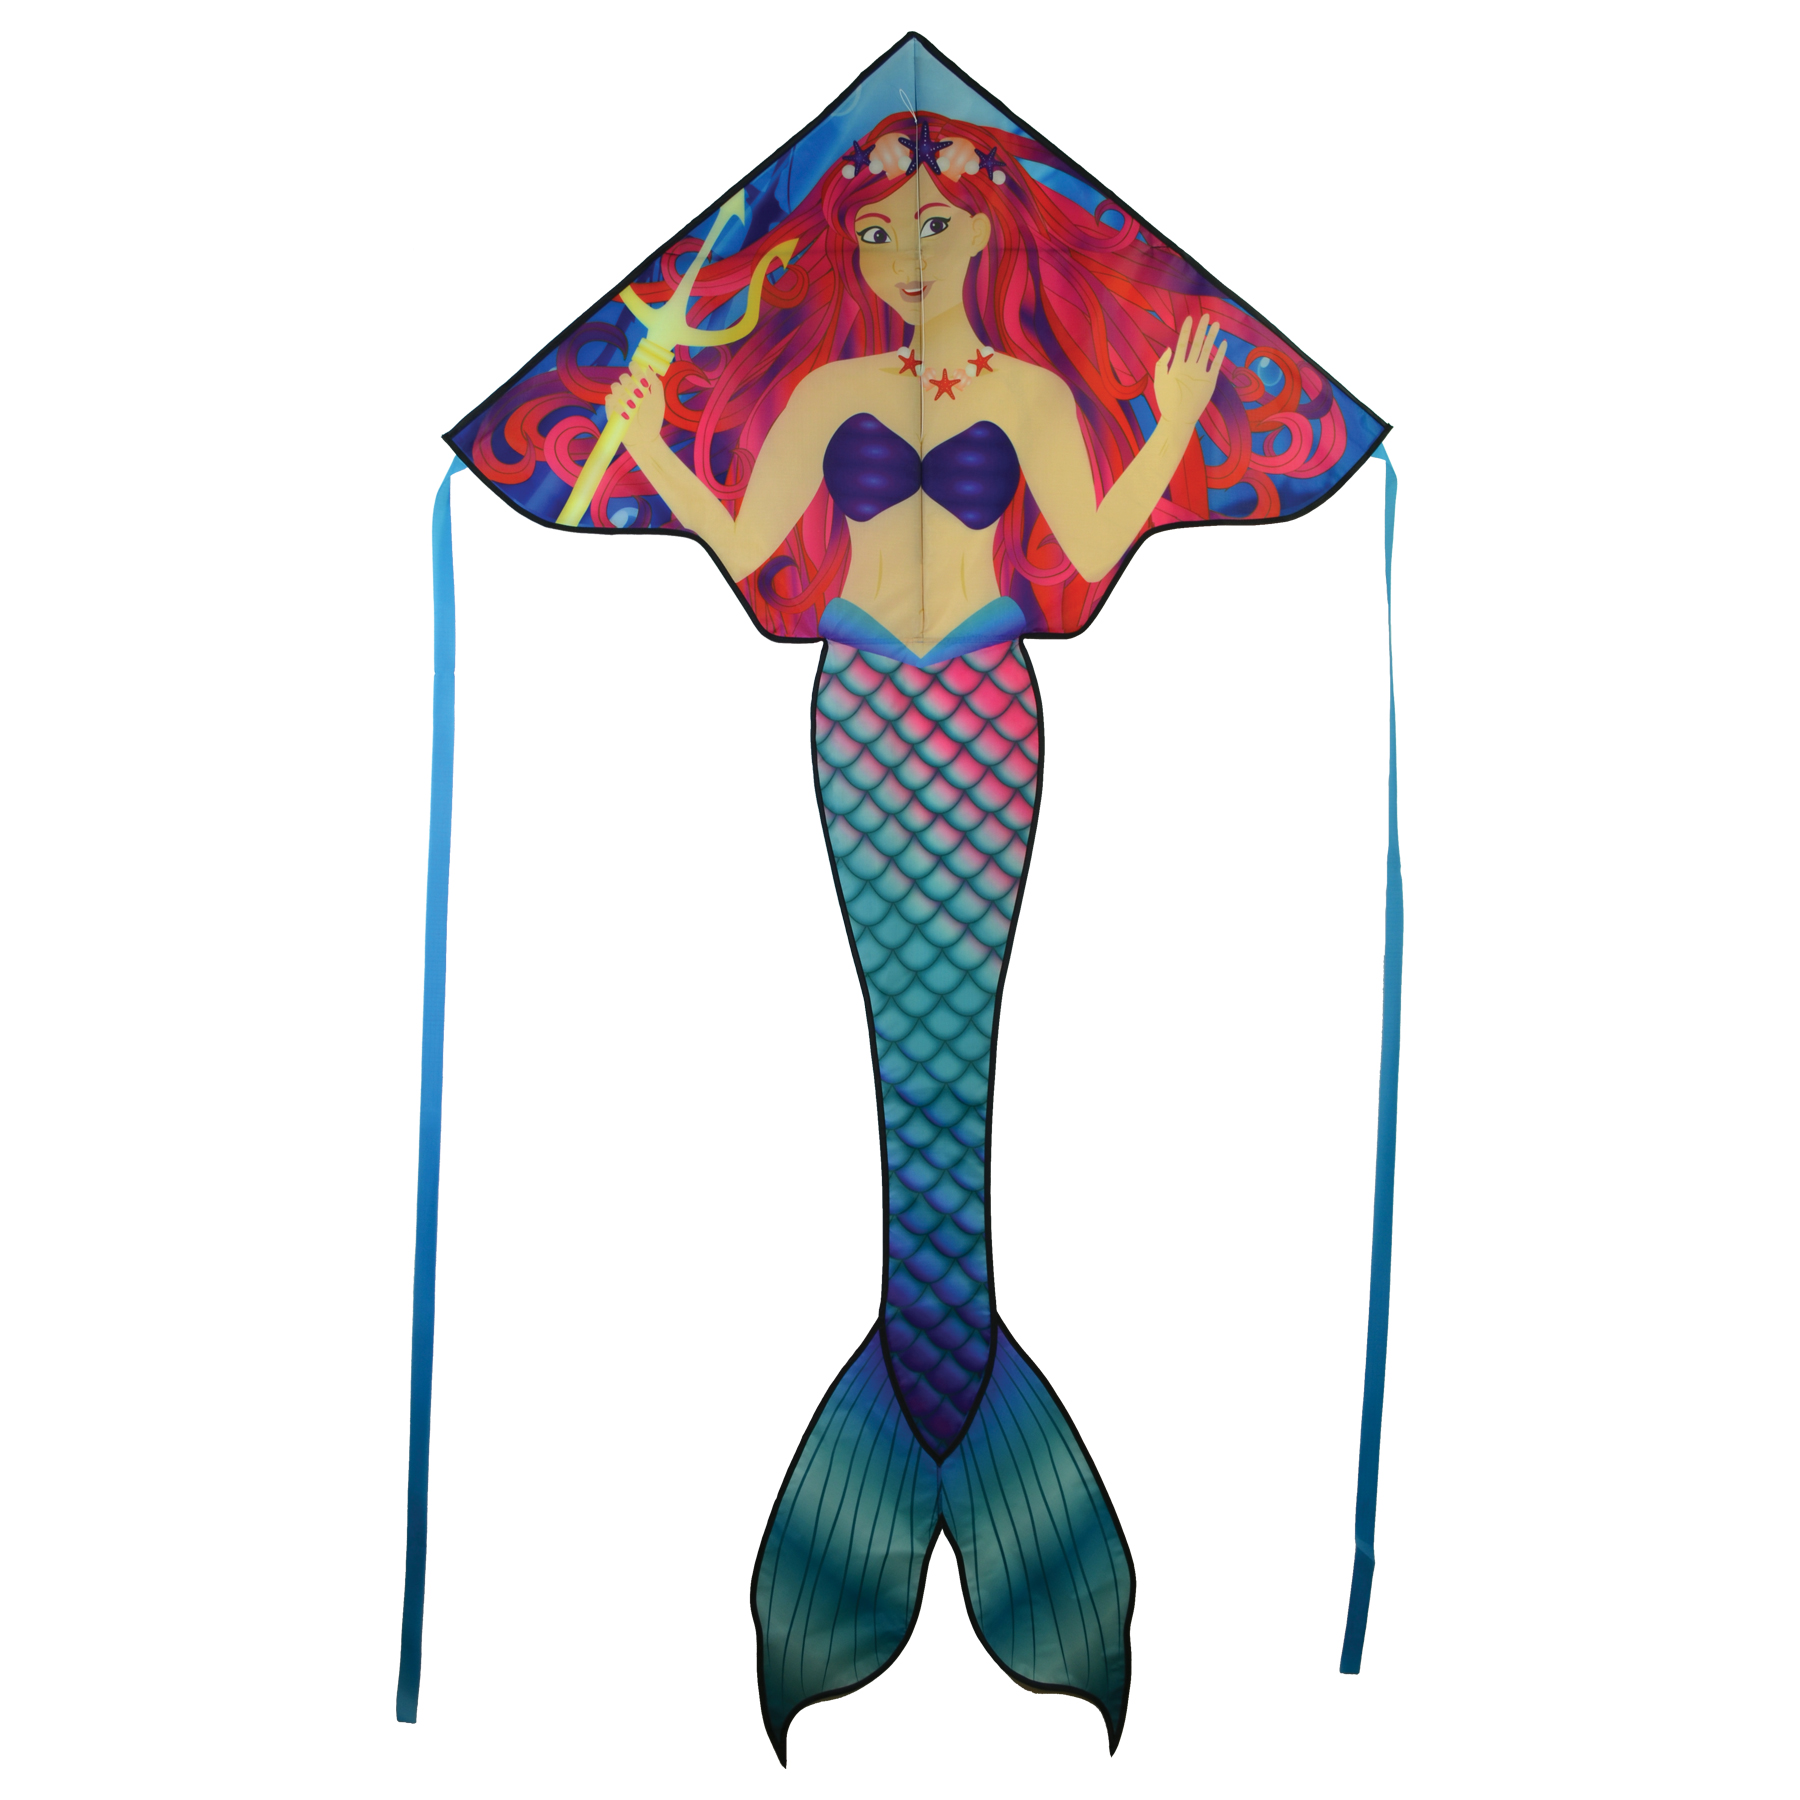 In the Breeze 3272 — Mermaid 45-inch Fly-Hi Kite - Fun, Easy Flying Kite for All Ages - image 1 of 2